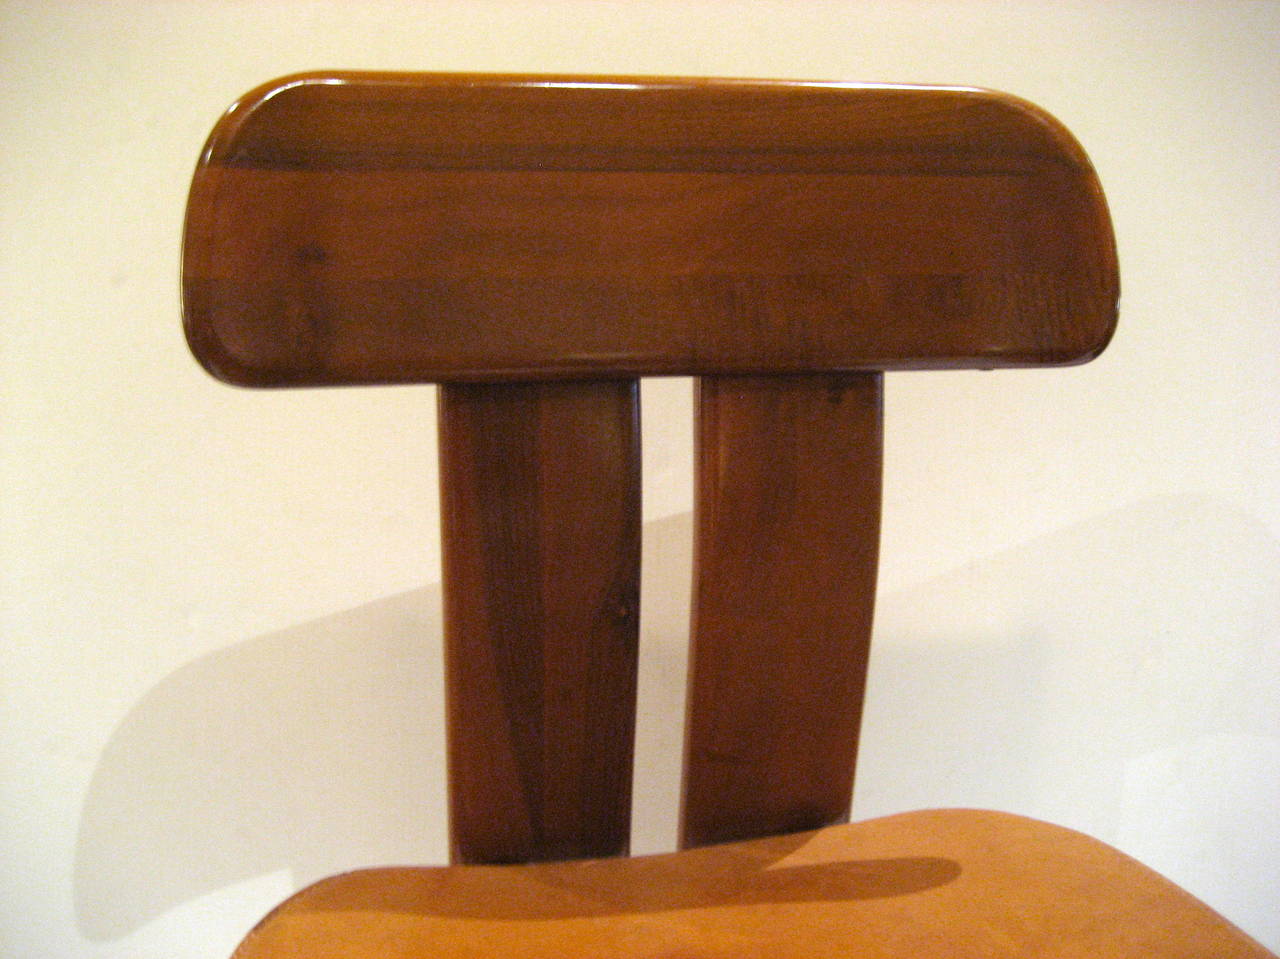 20th Century Italian Modern Chairs by Tobia Scarpa Walnut and Leather Seat